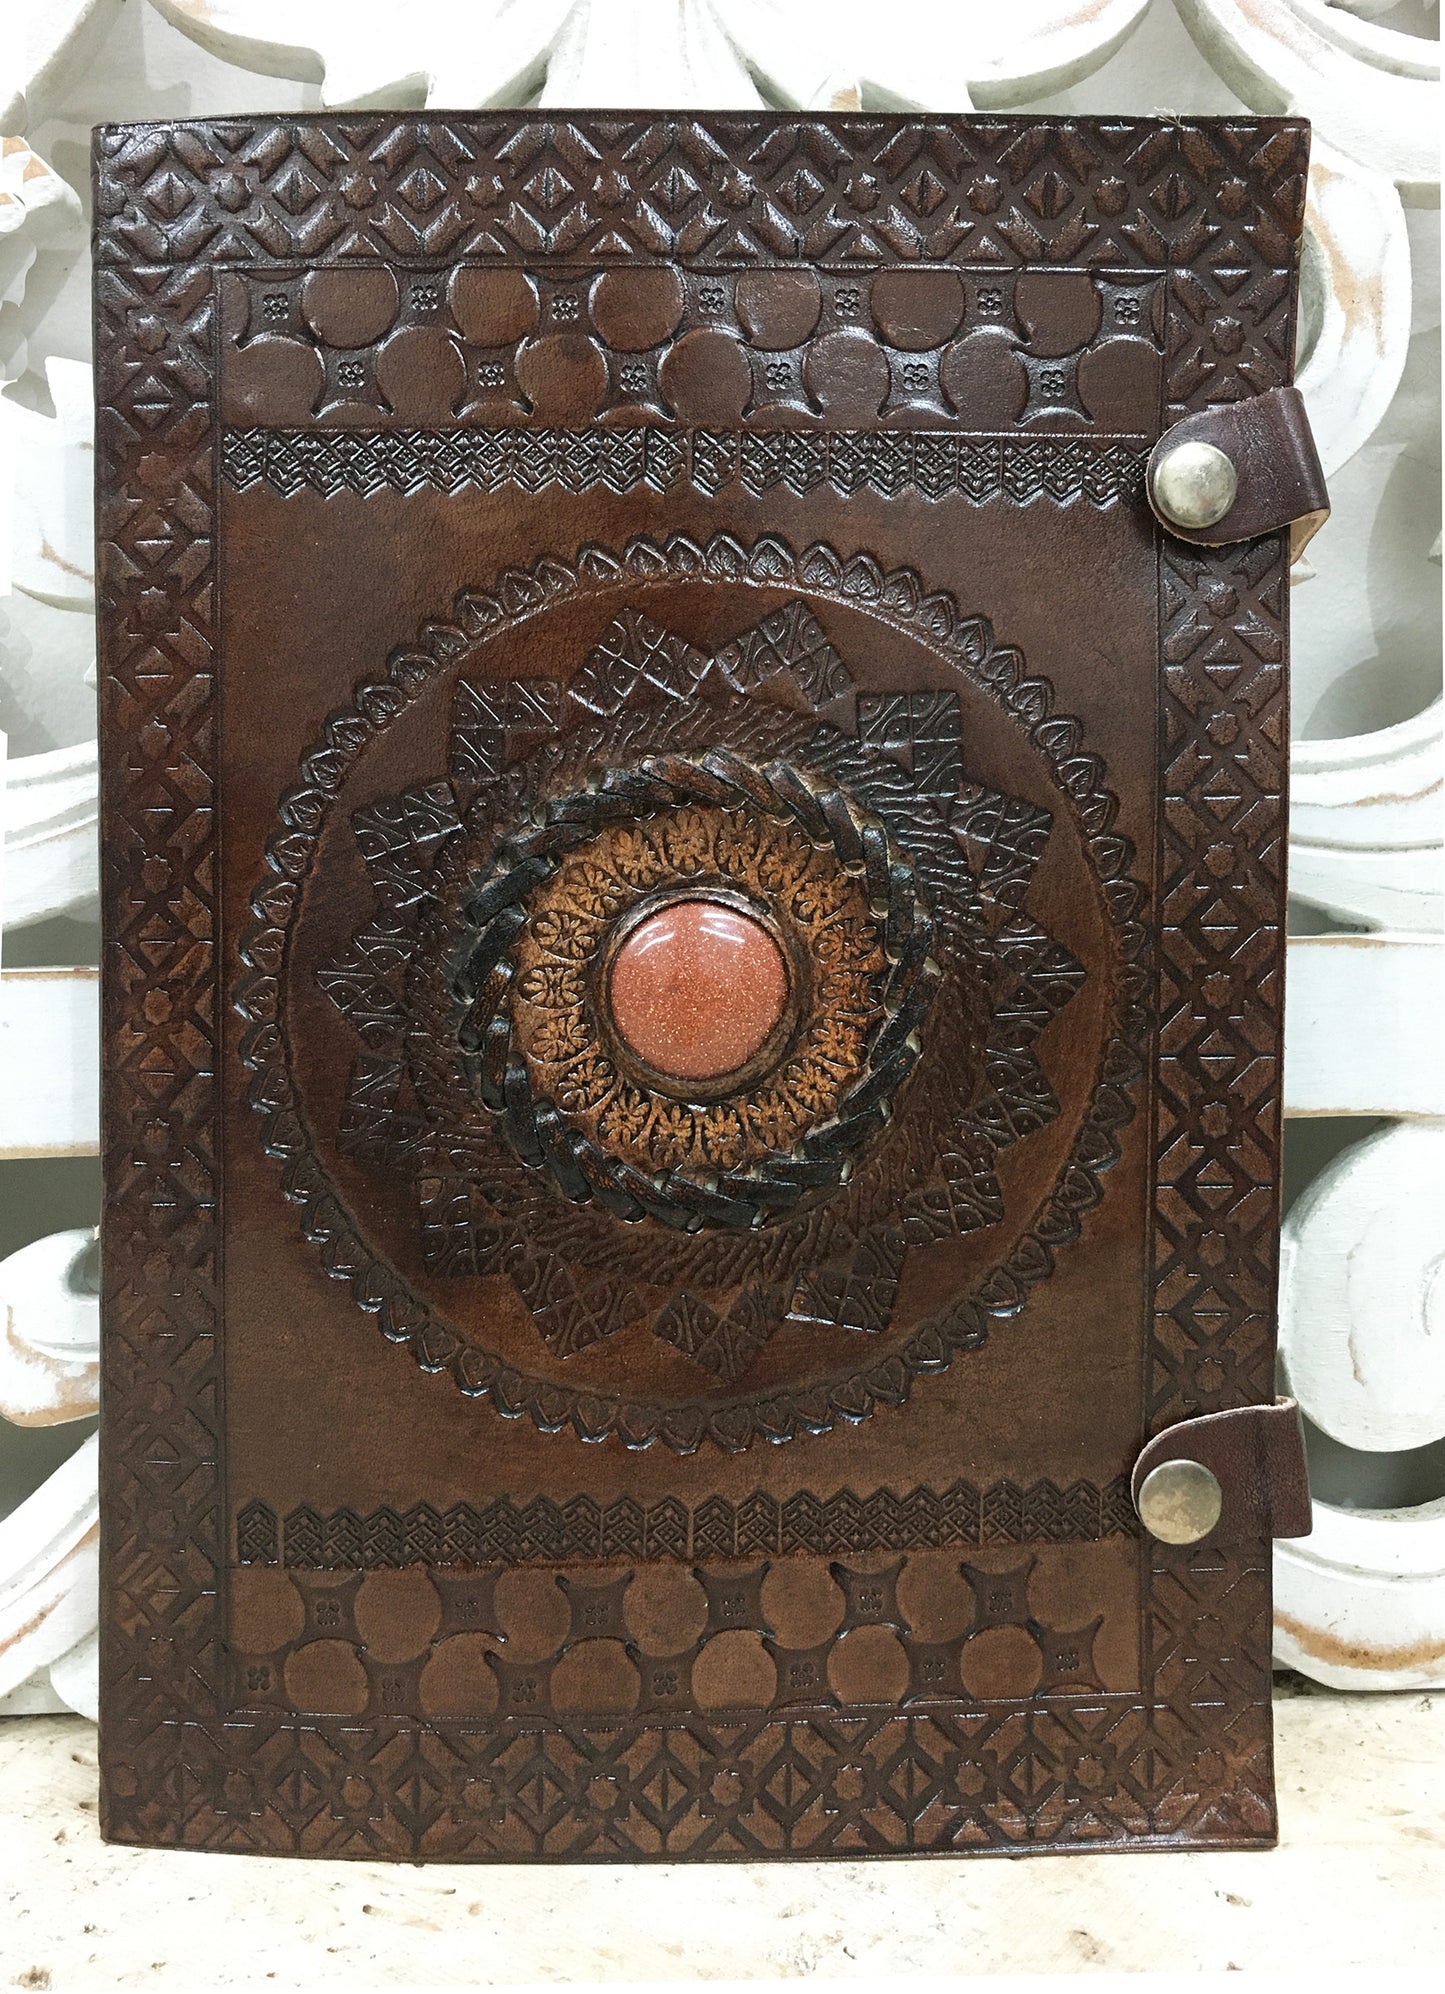 Hand Embossed Camel leather Journal with Gemstones & Button Clasp - 10" x 7" x 1"